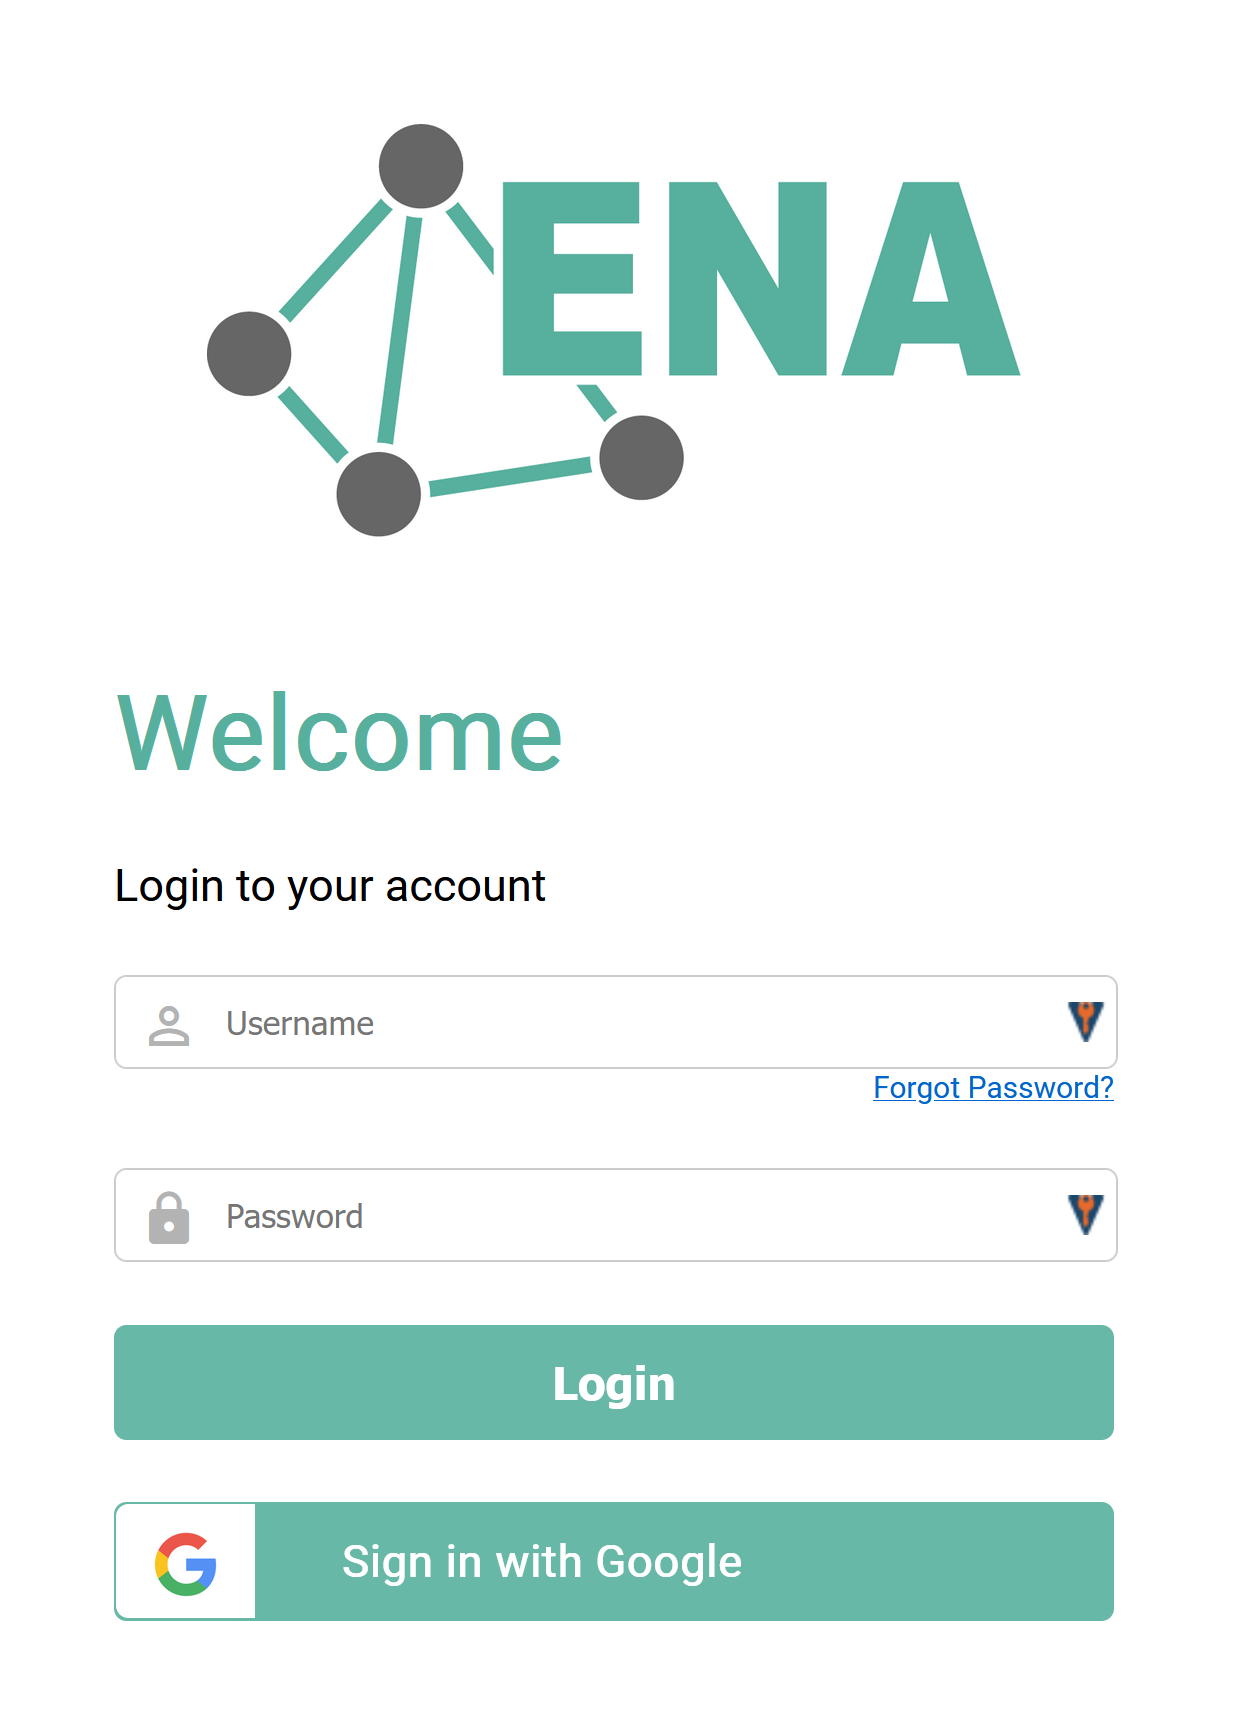 A screenshot of the ENA web app, showing the logo and the login form.